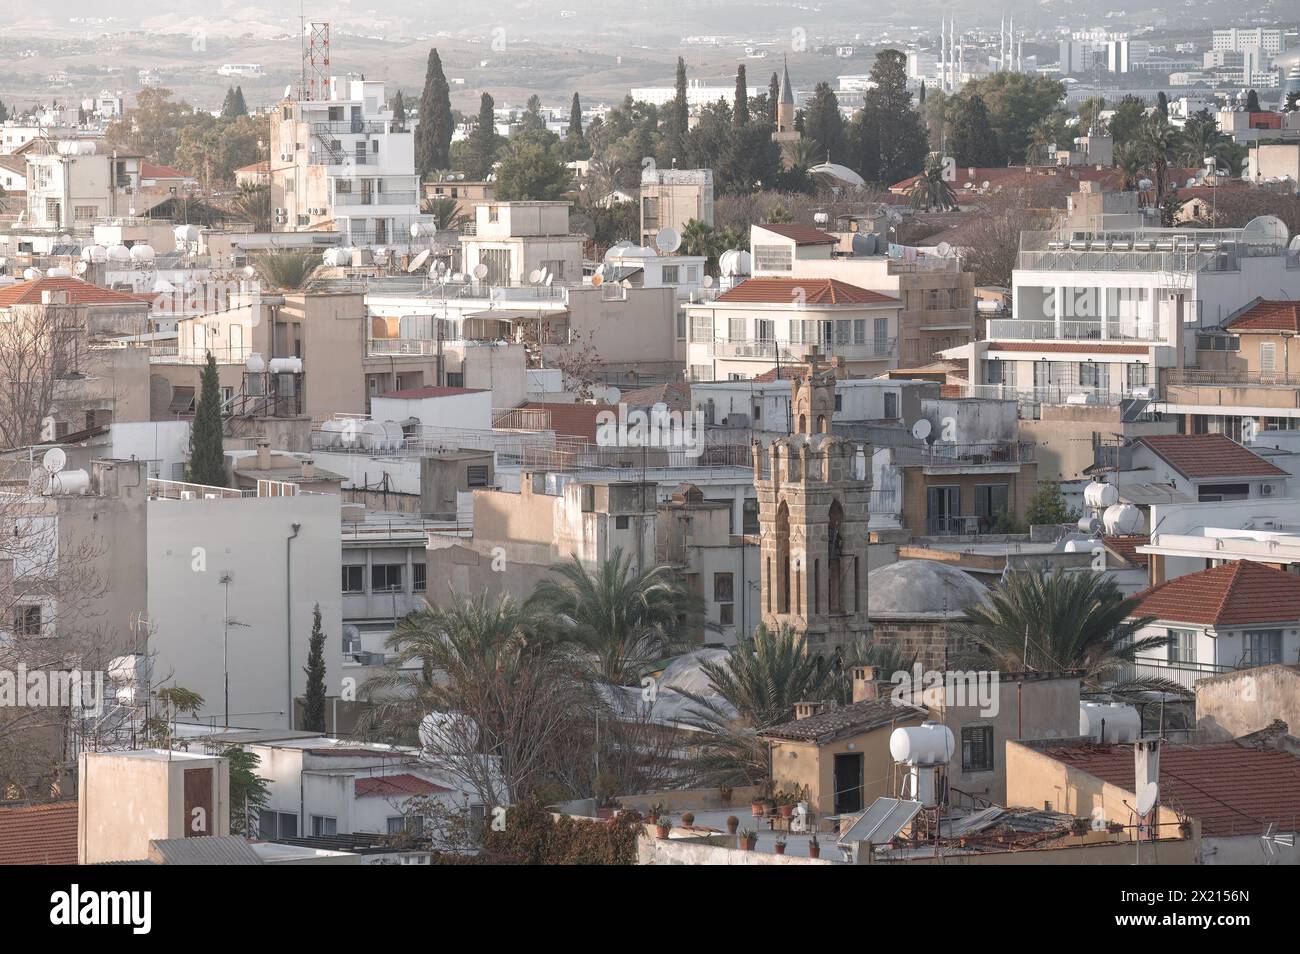 Overlooking a subdued historic part of Nicosia cityscape Stock Photo